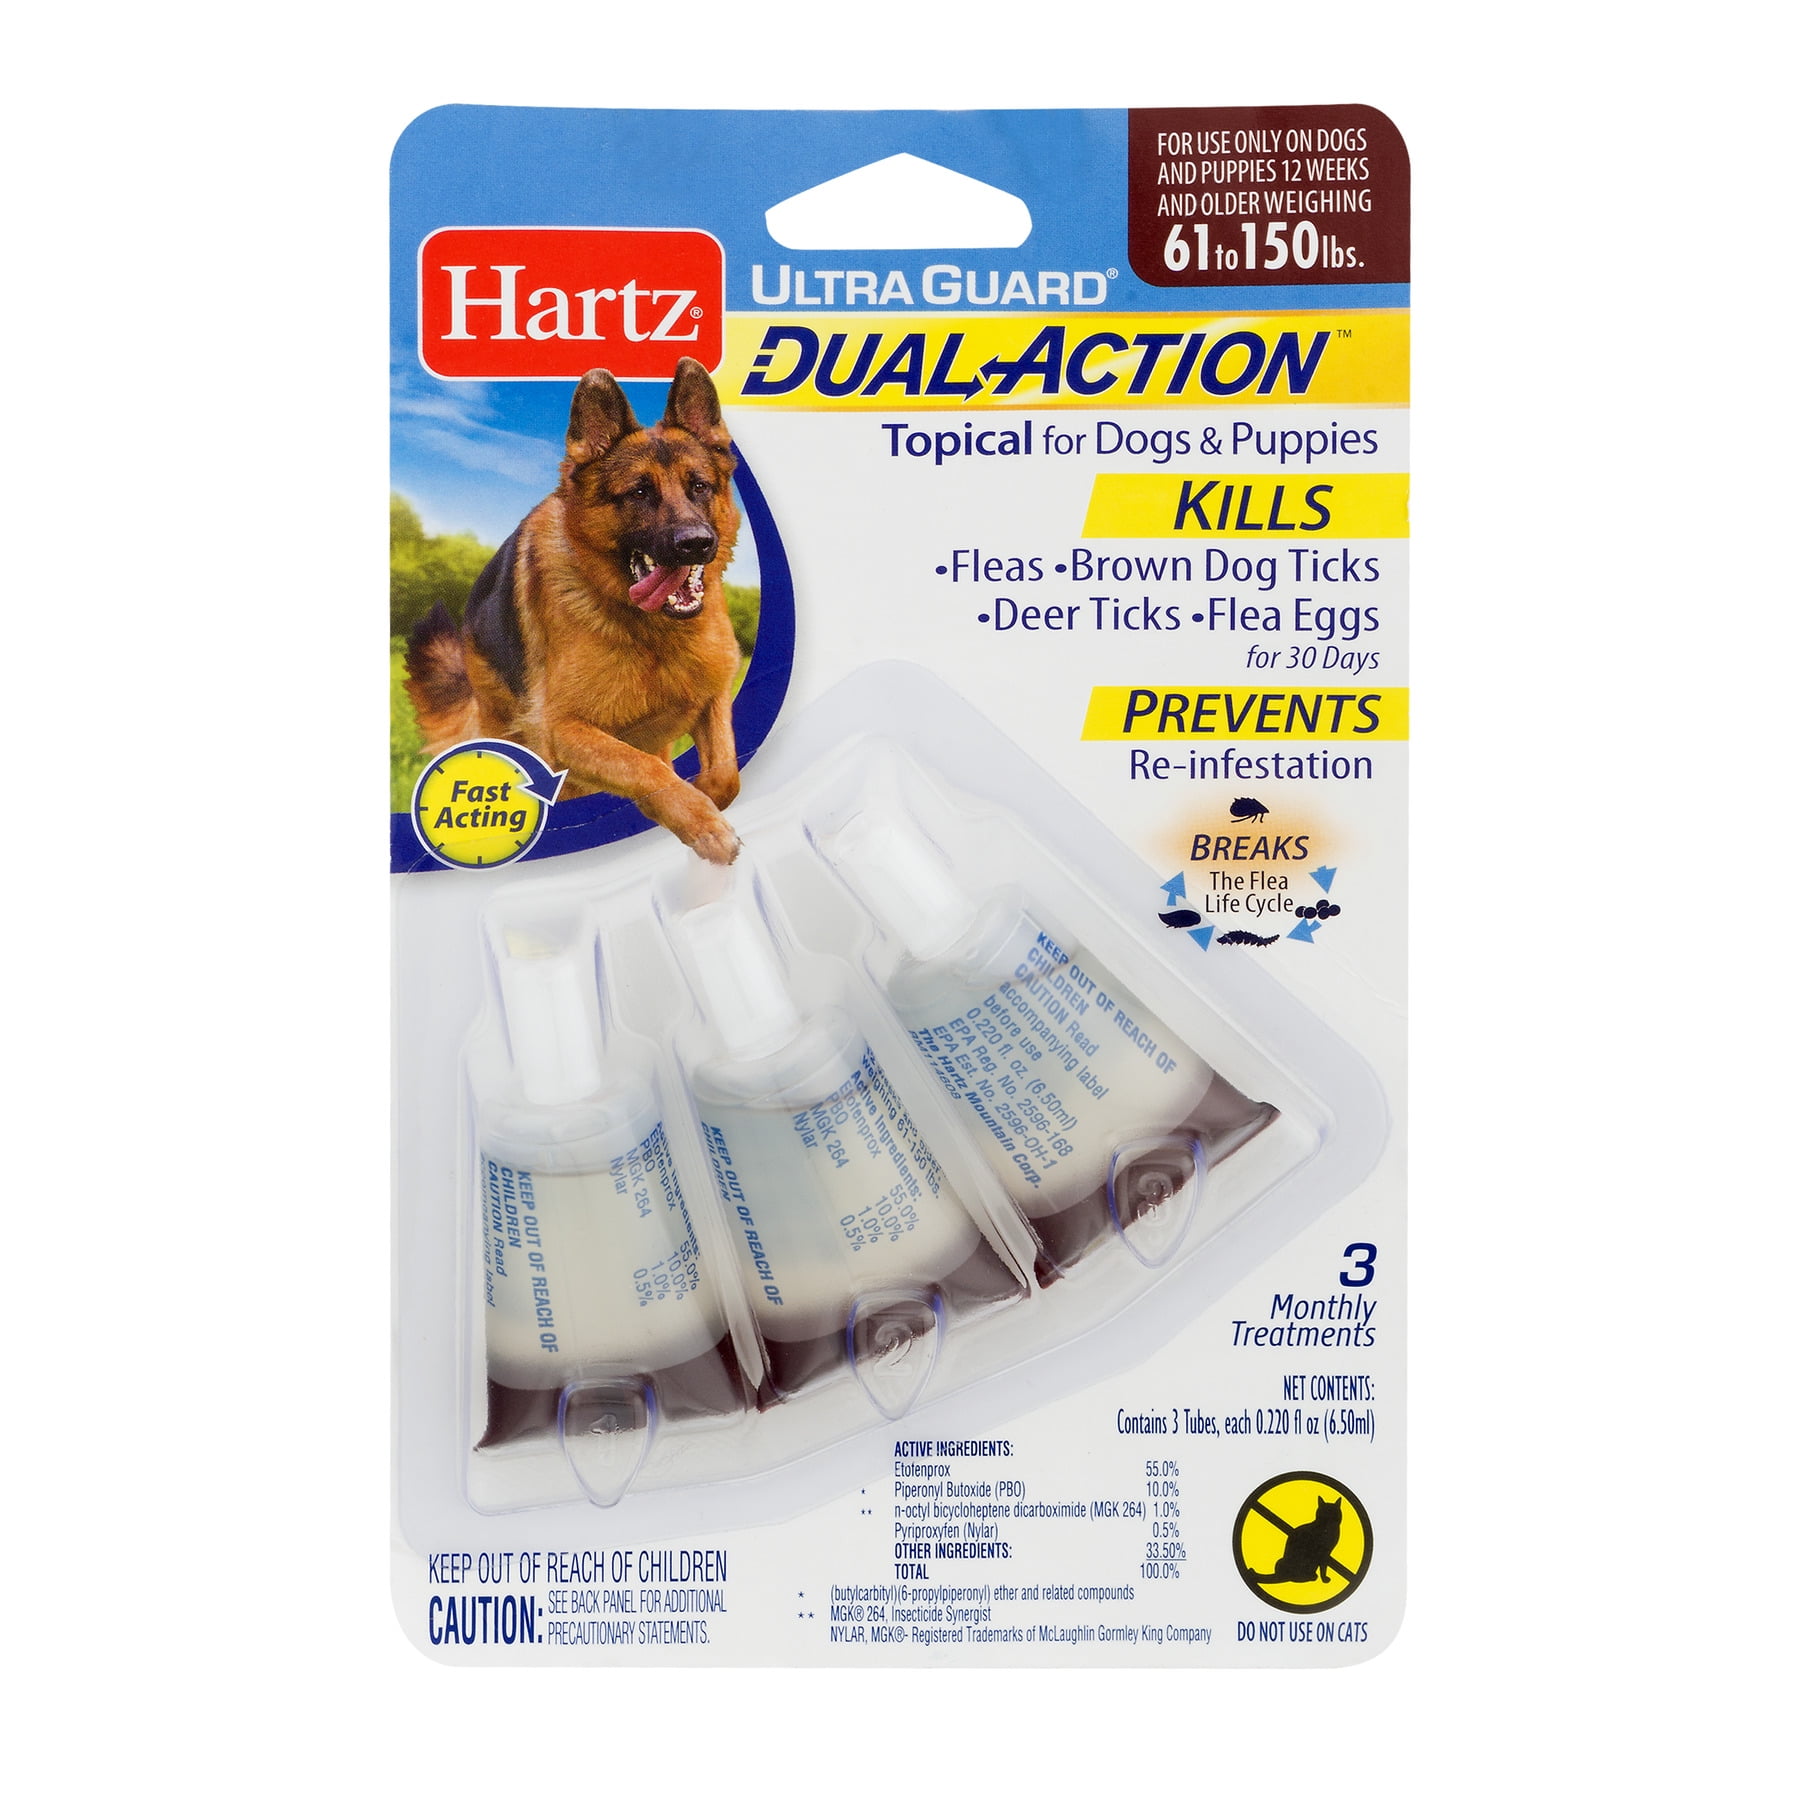 Hartz UltraGuard Dual Action Flea And Tick Topical For Dogs 61-150lbs, 3 Monthly Treatments